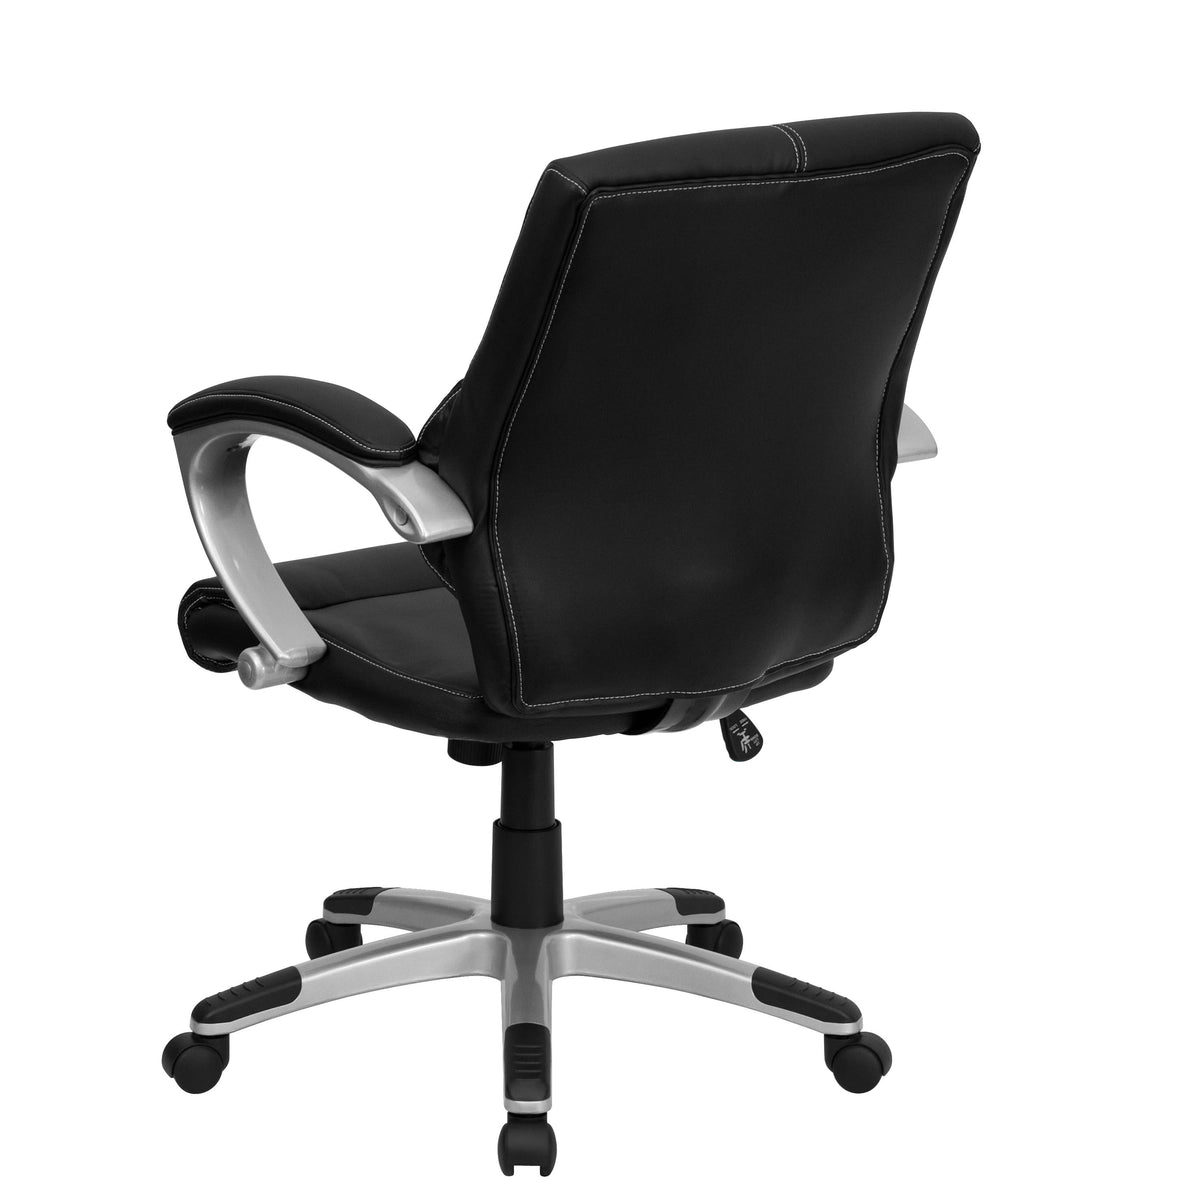 Mid-Back Black LeatherSoft Contemporary Swivel Manager's Office Chair with Arms